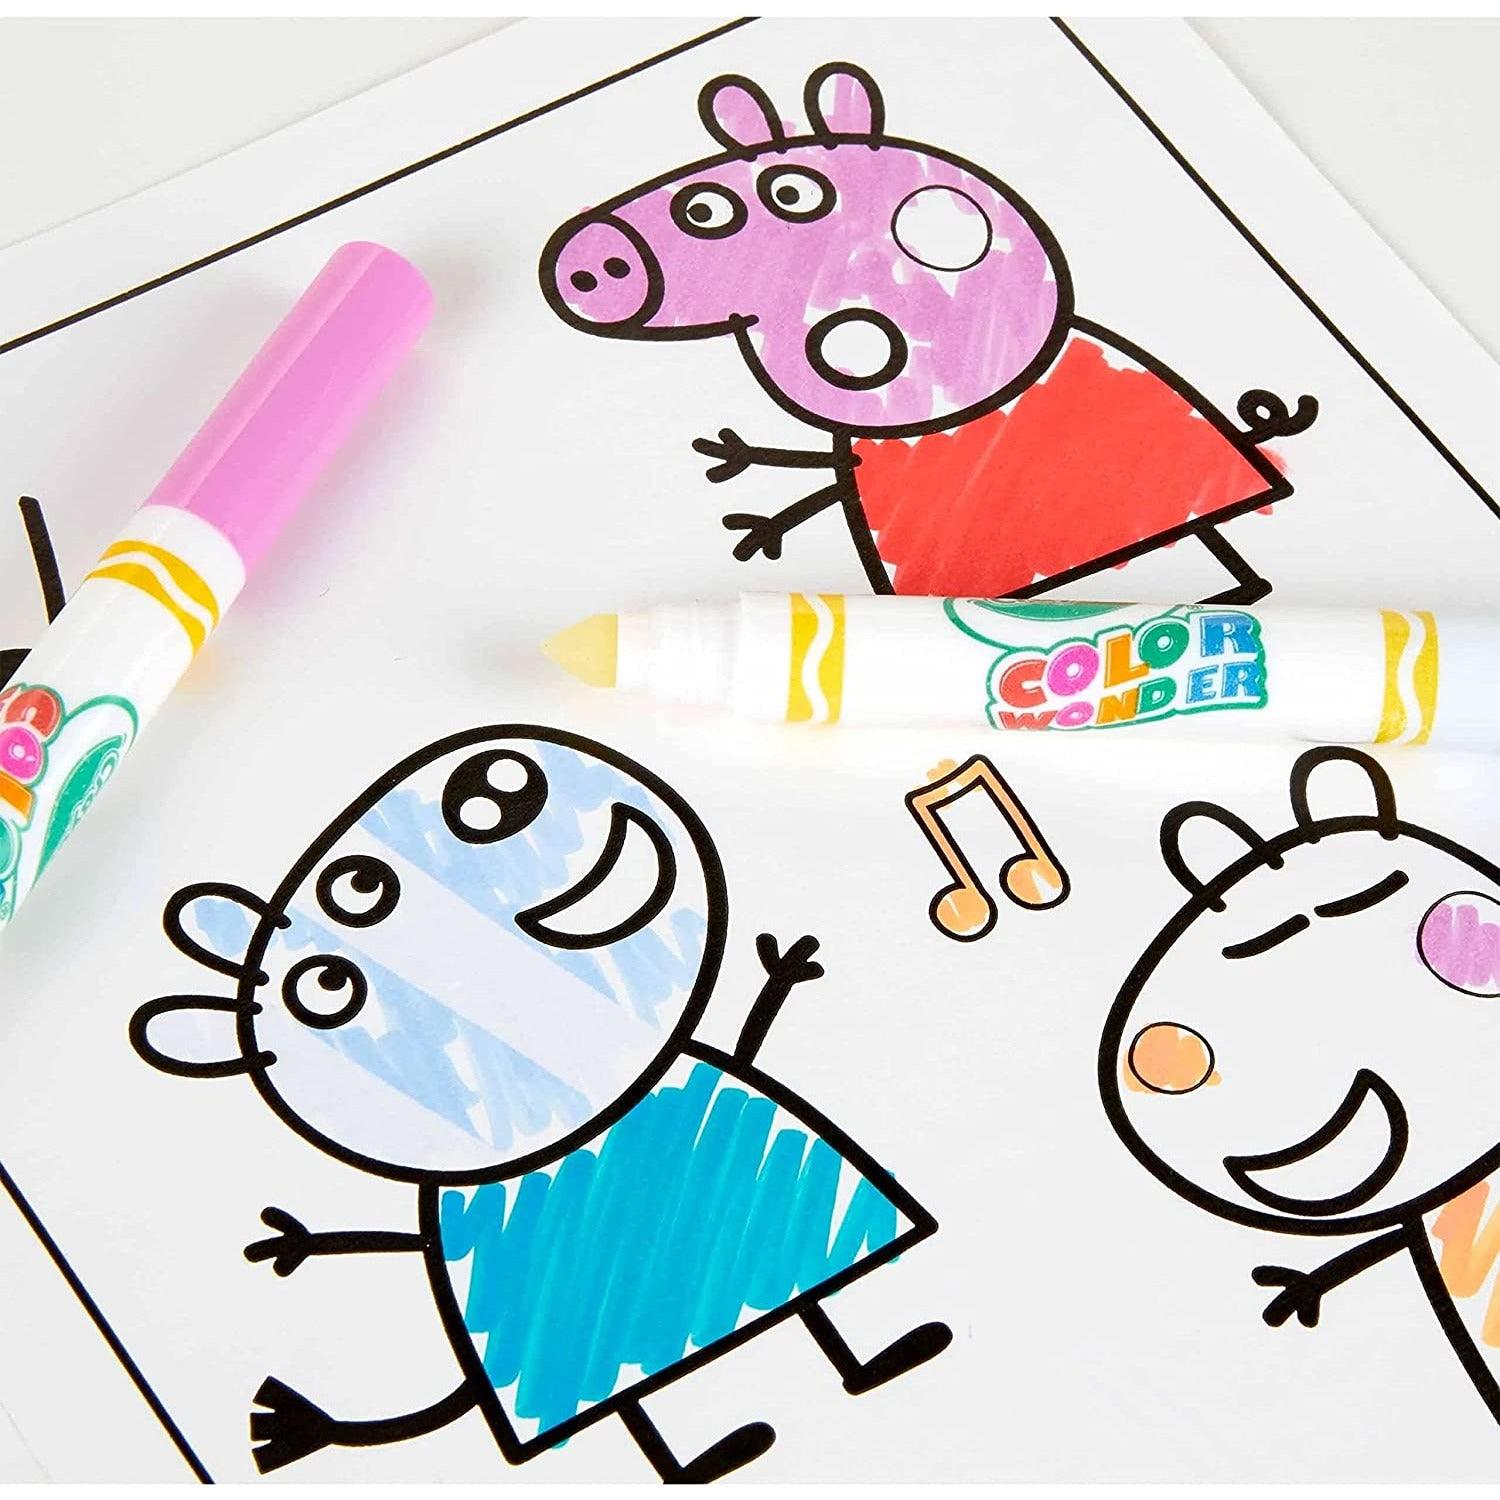 Crayola Peppa Pig Coloring Pages & Markers, Color Wonder Mess Free Coloring, Easter Basket Stuffers - BumbleToys - 5-7 Years, Boys, Drawing & Painting, Girls, Nursery Toys, OXE, Peppa Pig, Pre-Order